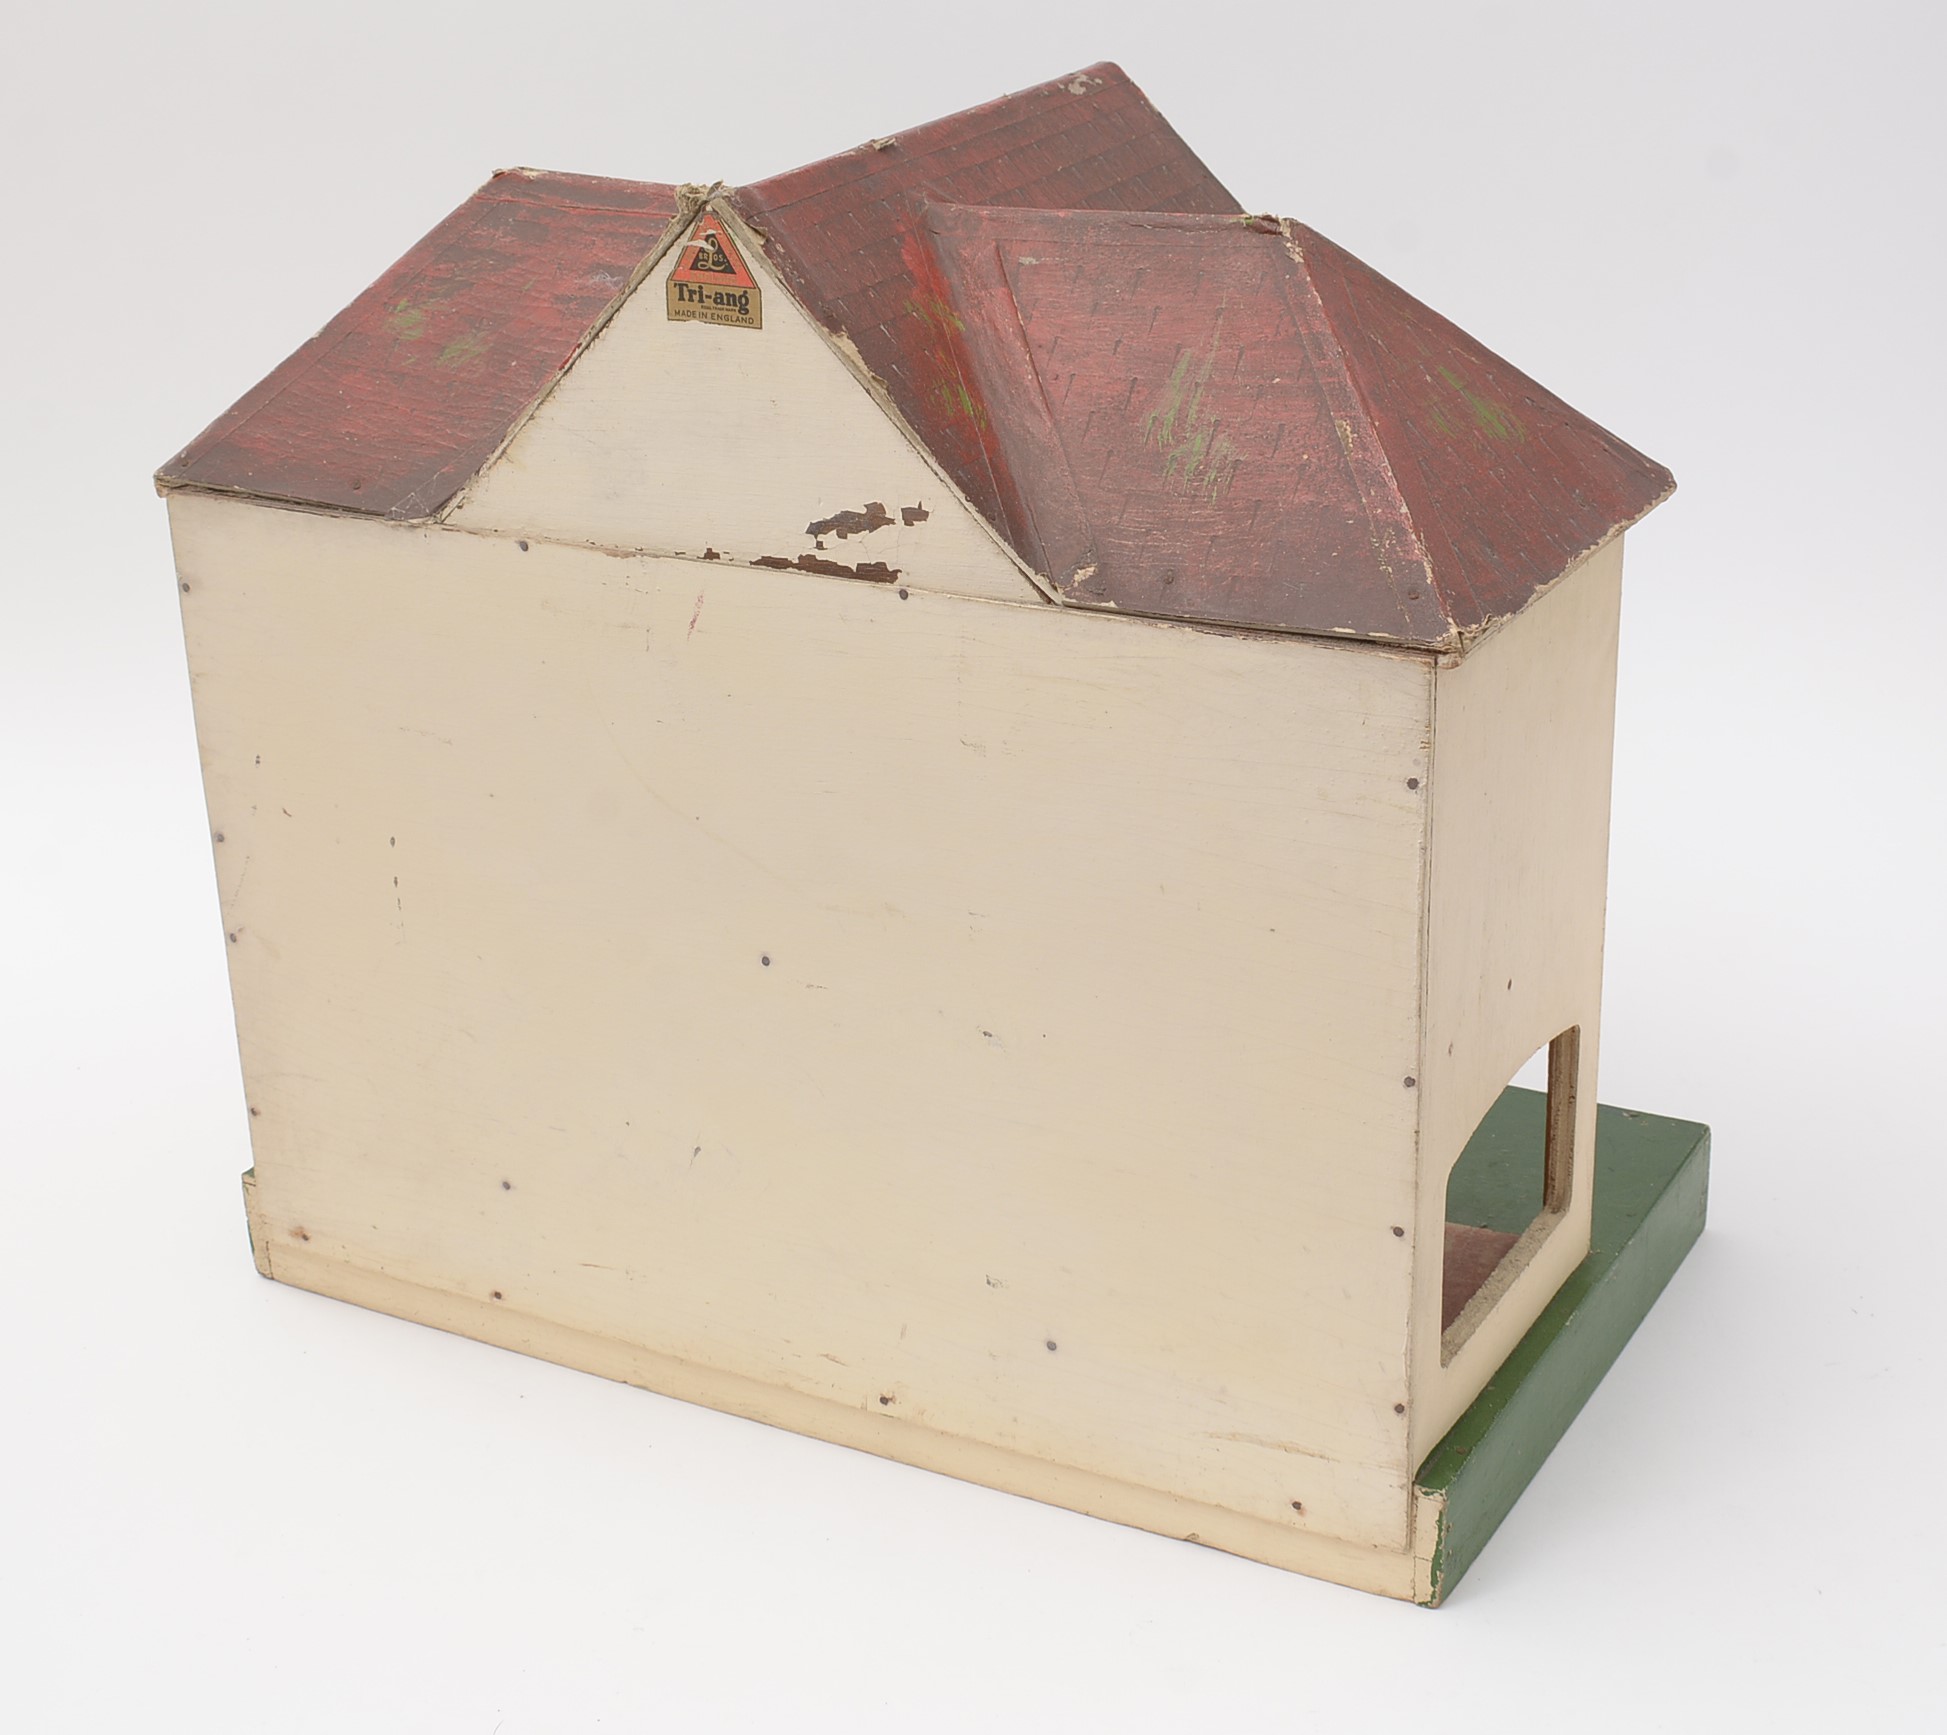 1930s Triangtois art deco dolls house up for auction at Boldon Auction  Galleries - Retro to Go